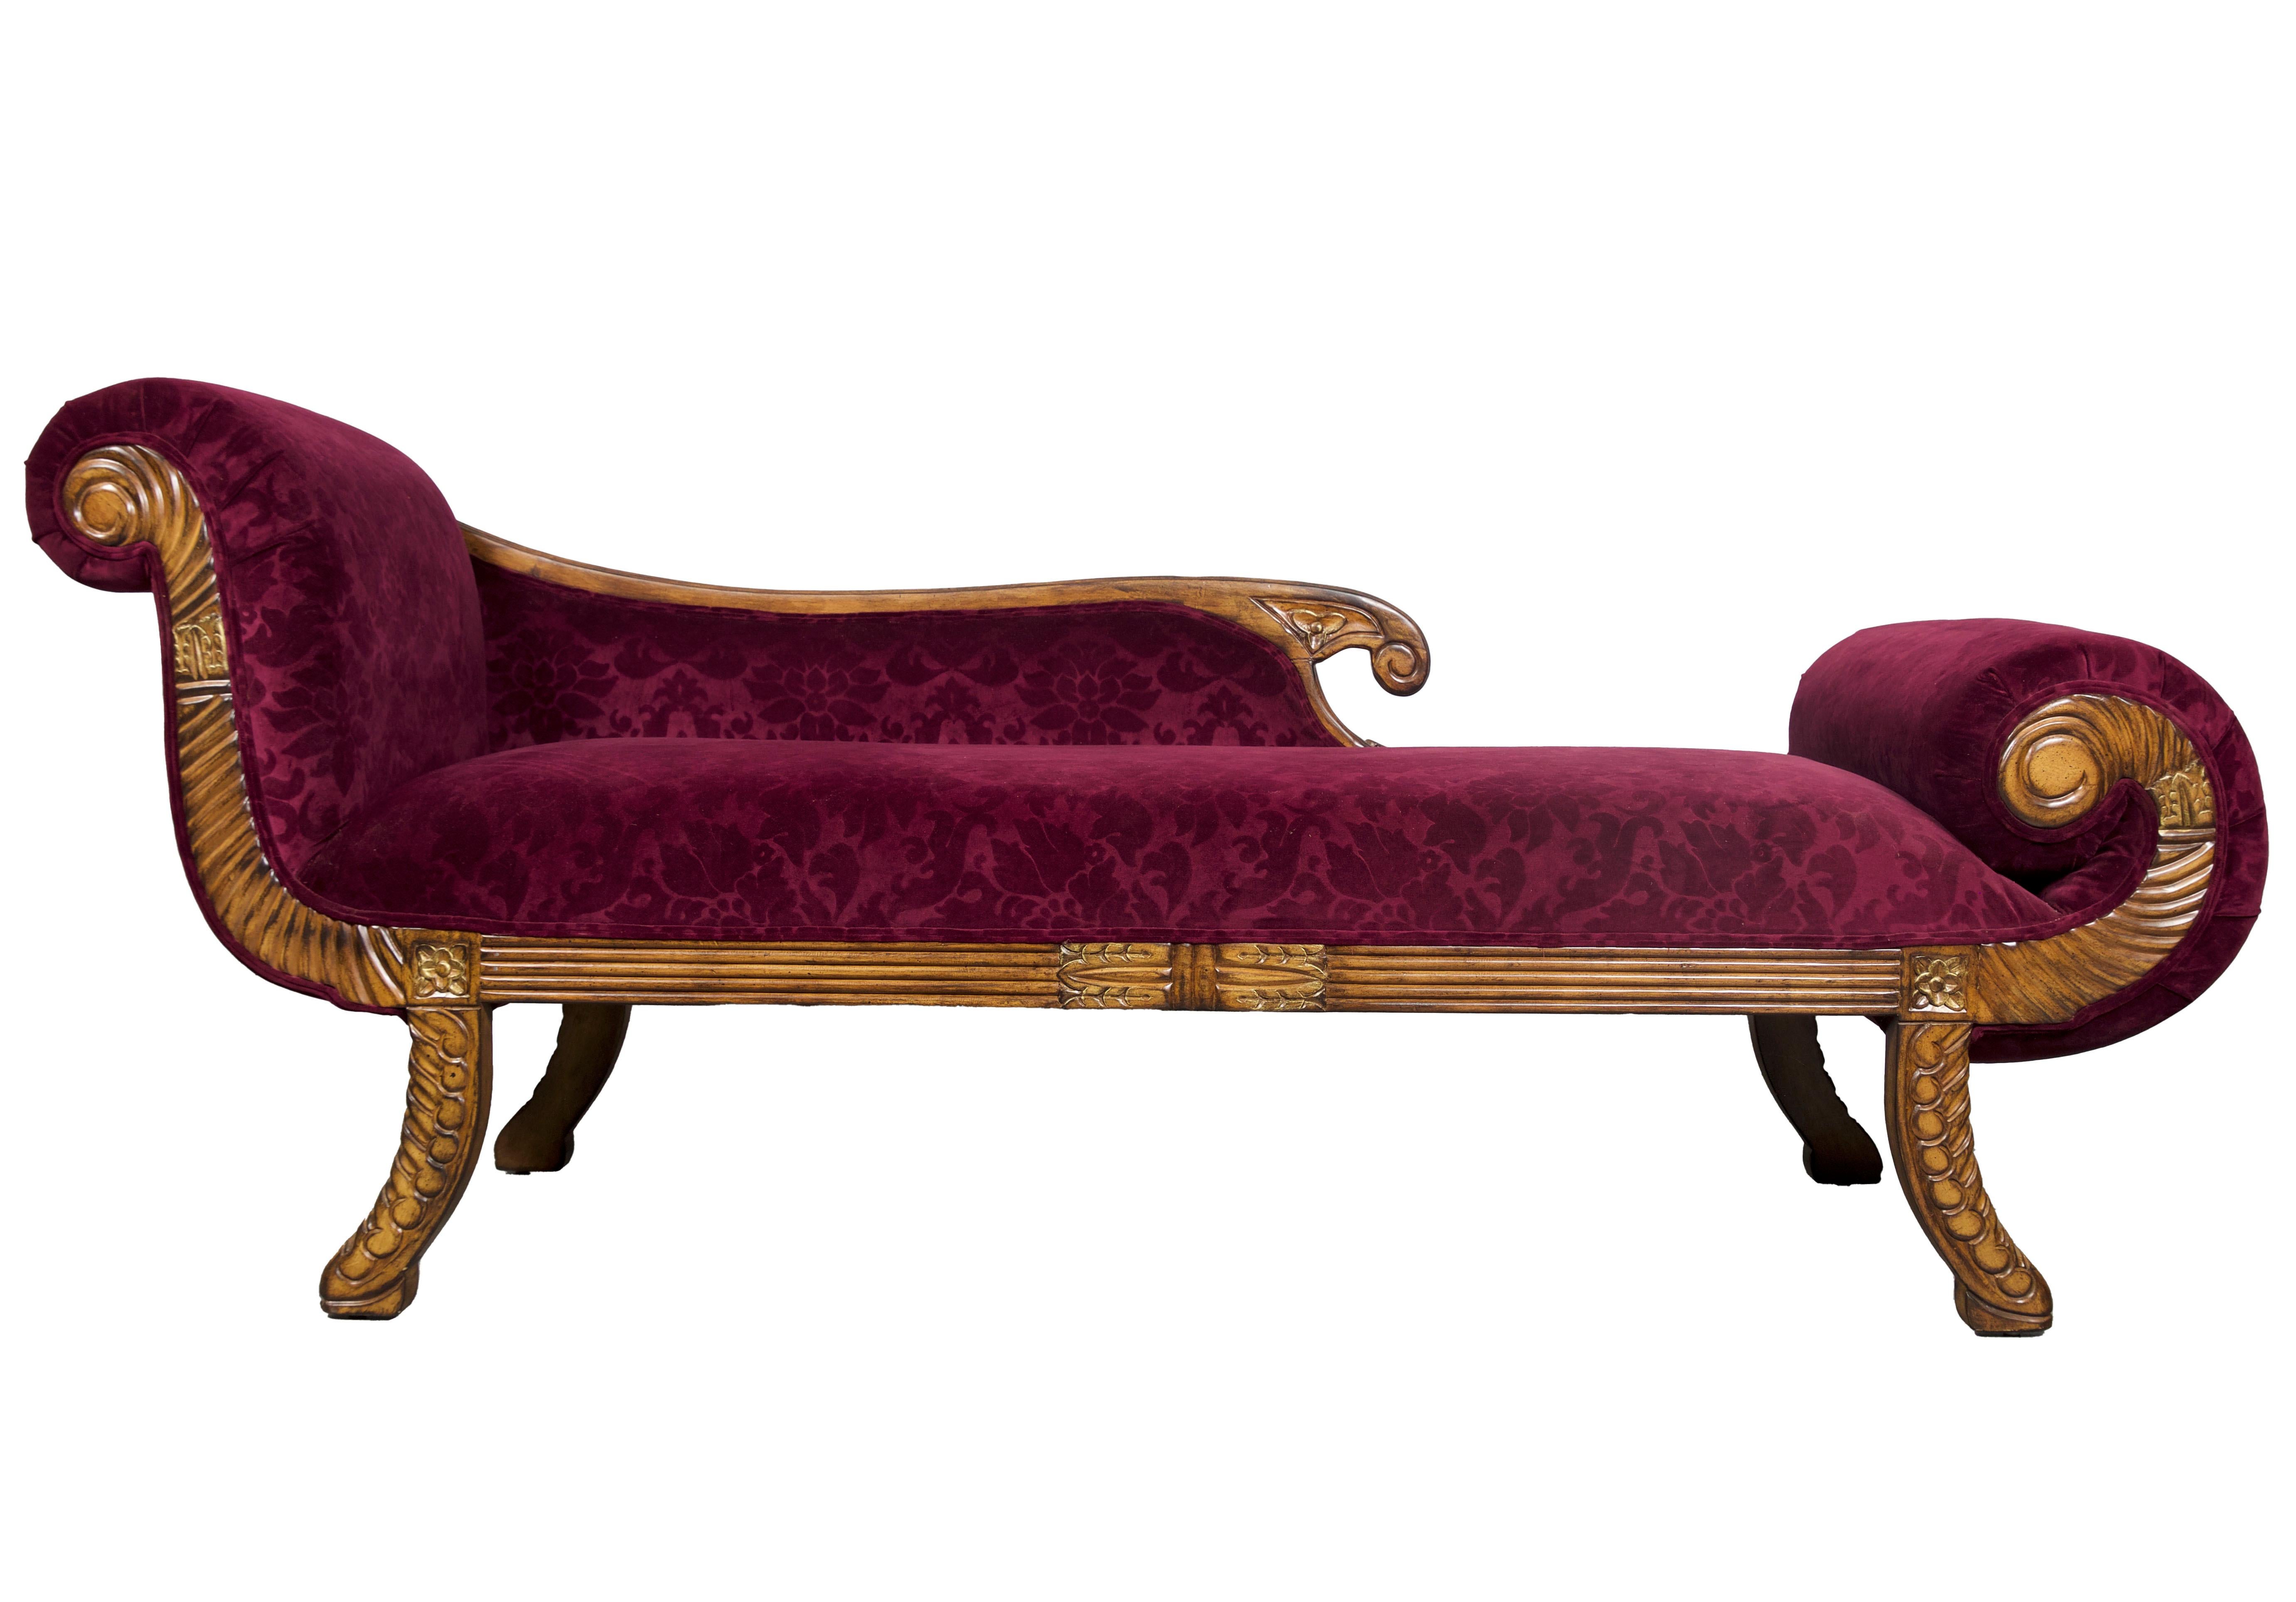 A Regency style upholstered carved day bed. The characteristic include a sleigh-style or scrolled back, scrolled arms, and intricately carved details on the legs and frame, echoing the neoclassical influences of the Regency period. The upholstery is